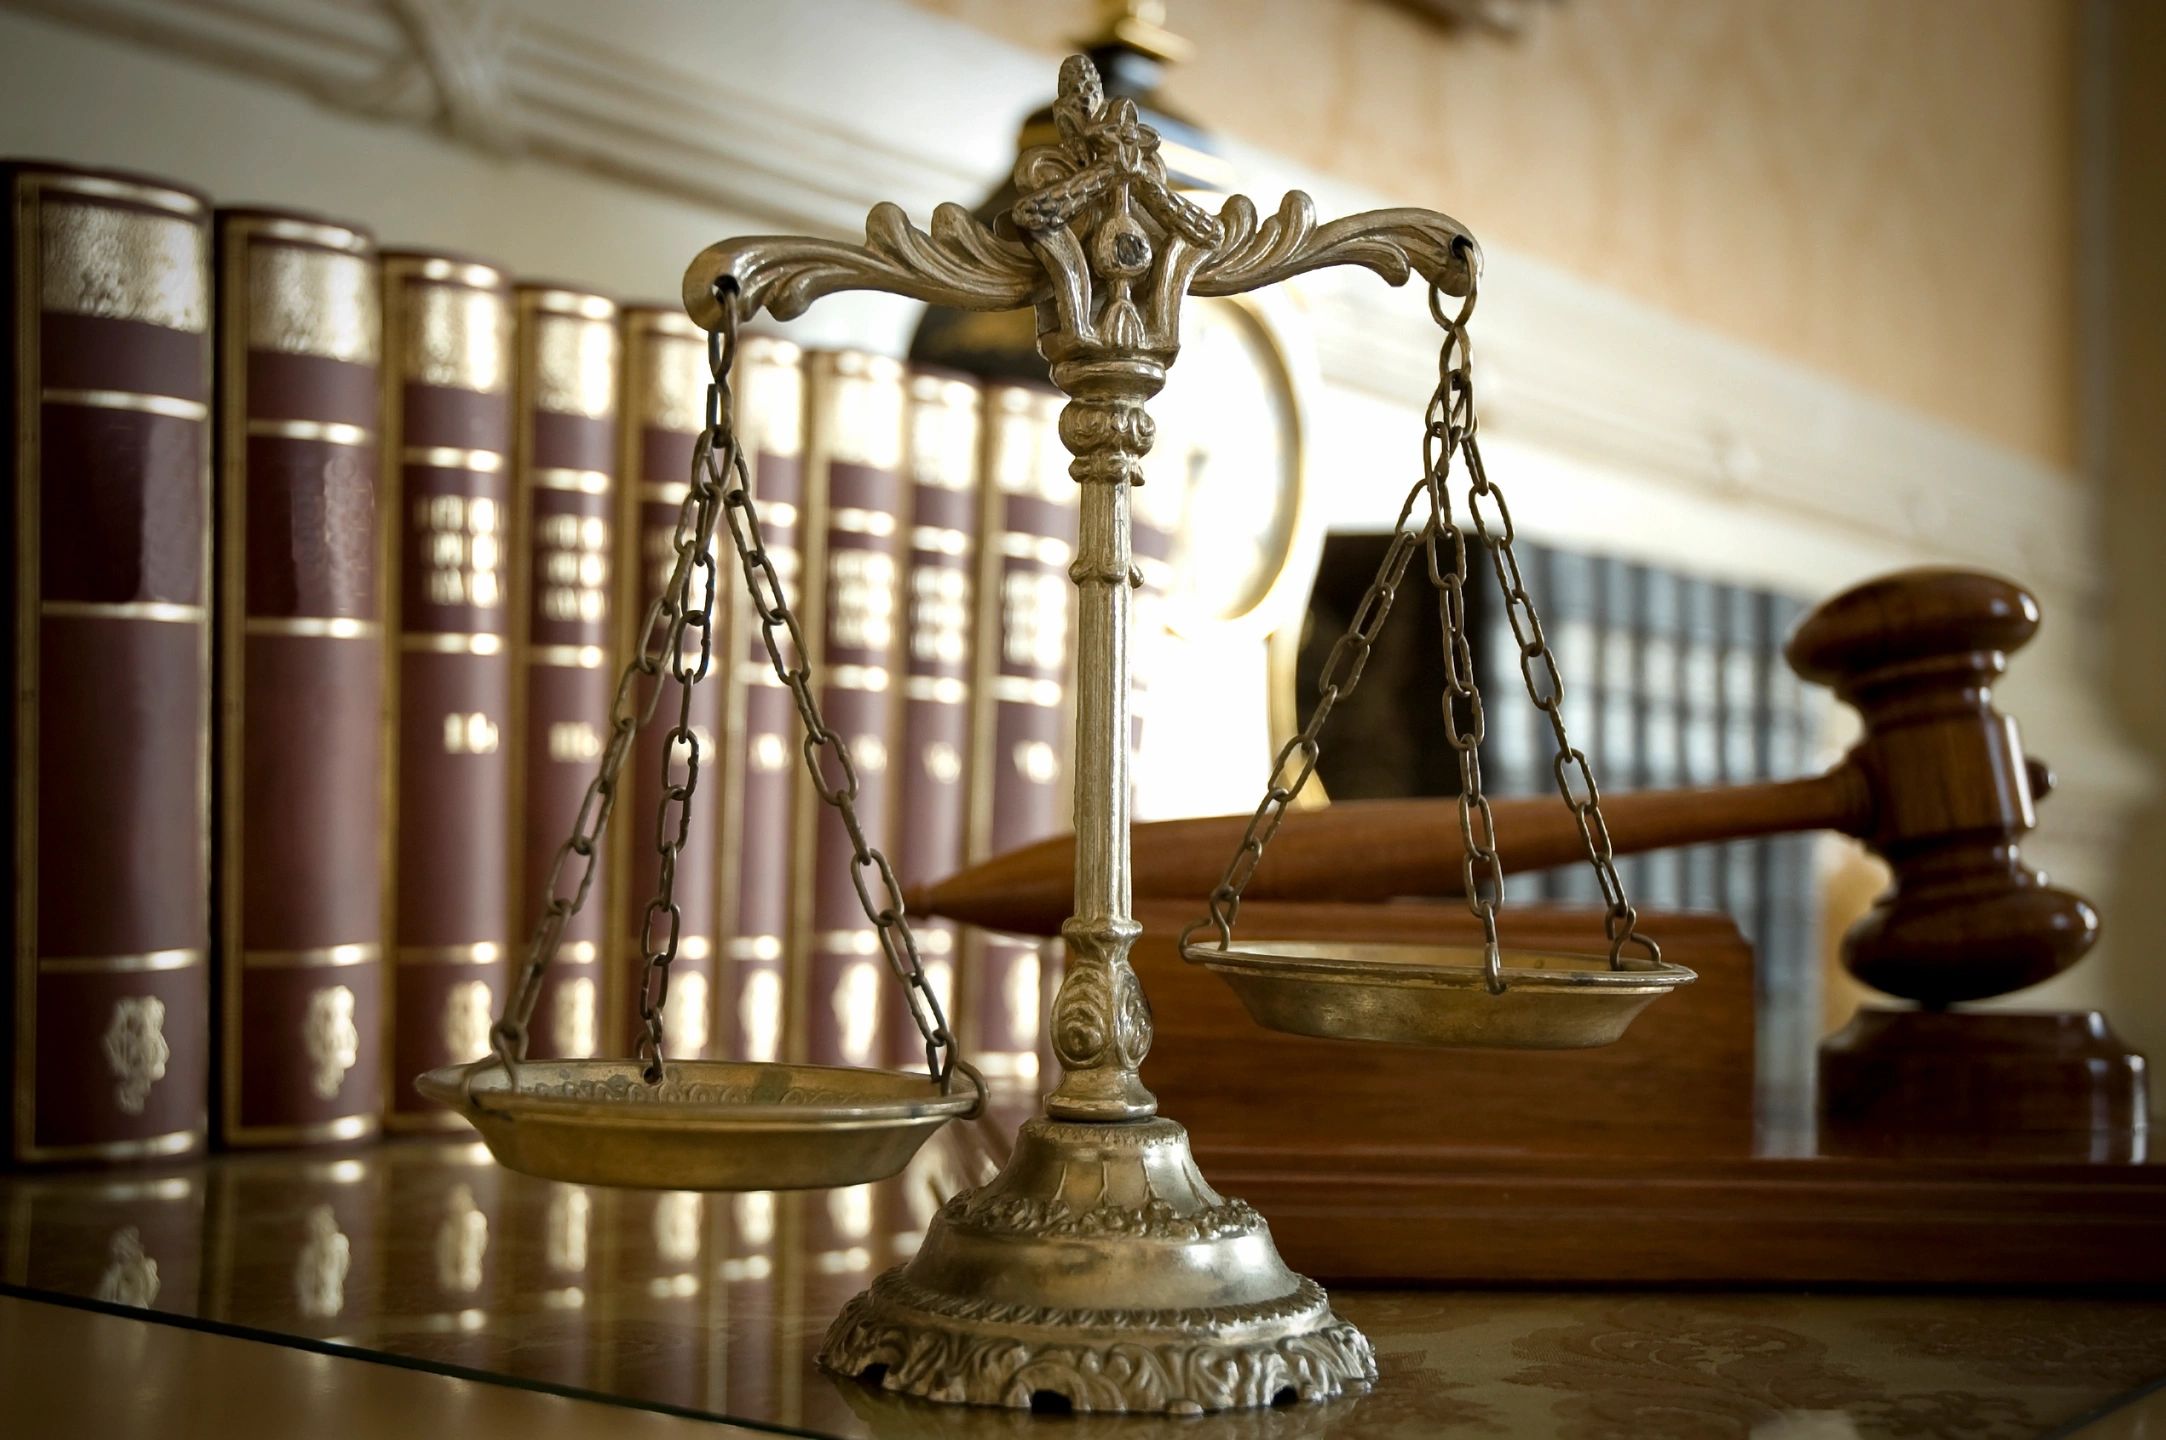 Scales of justice with gavel and law books